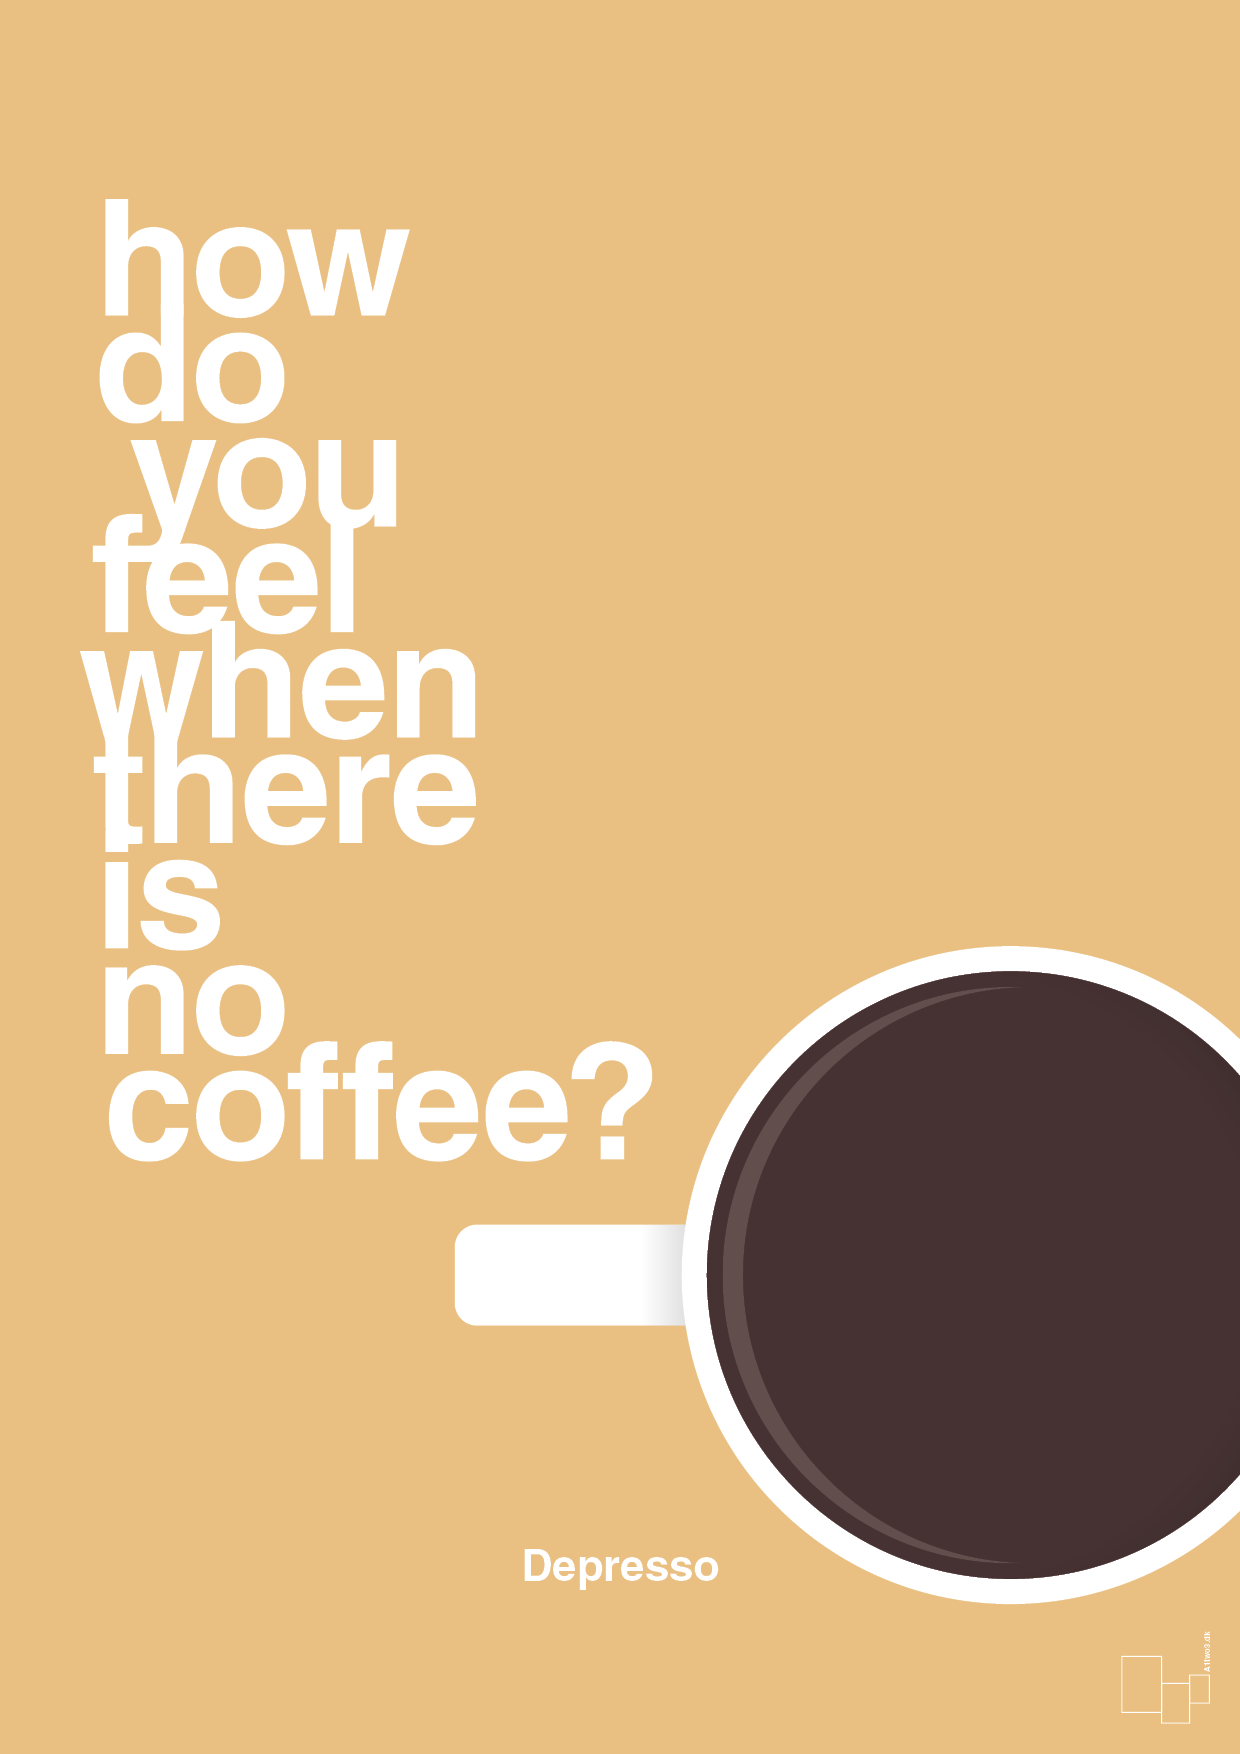 how do you feel when there is no coffee? depresso - Plakat med Mad & Drikke i Charismatic